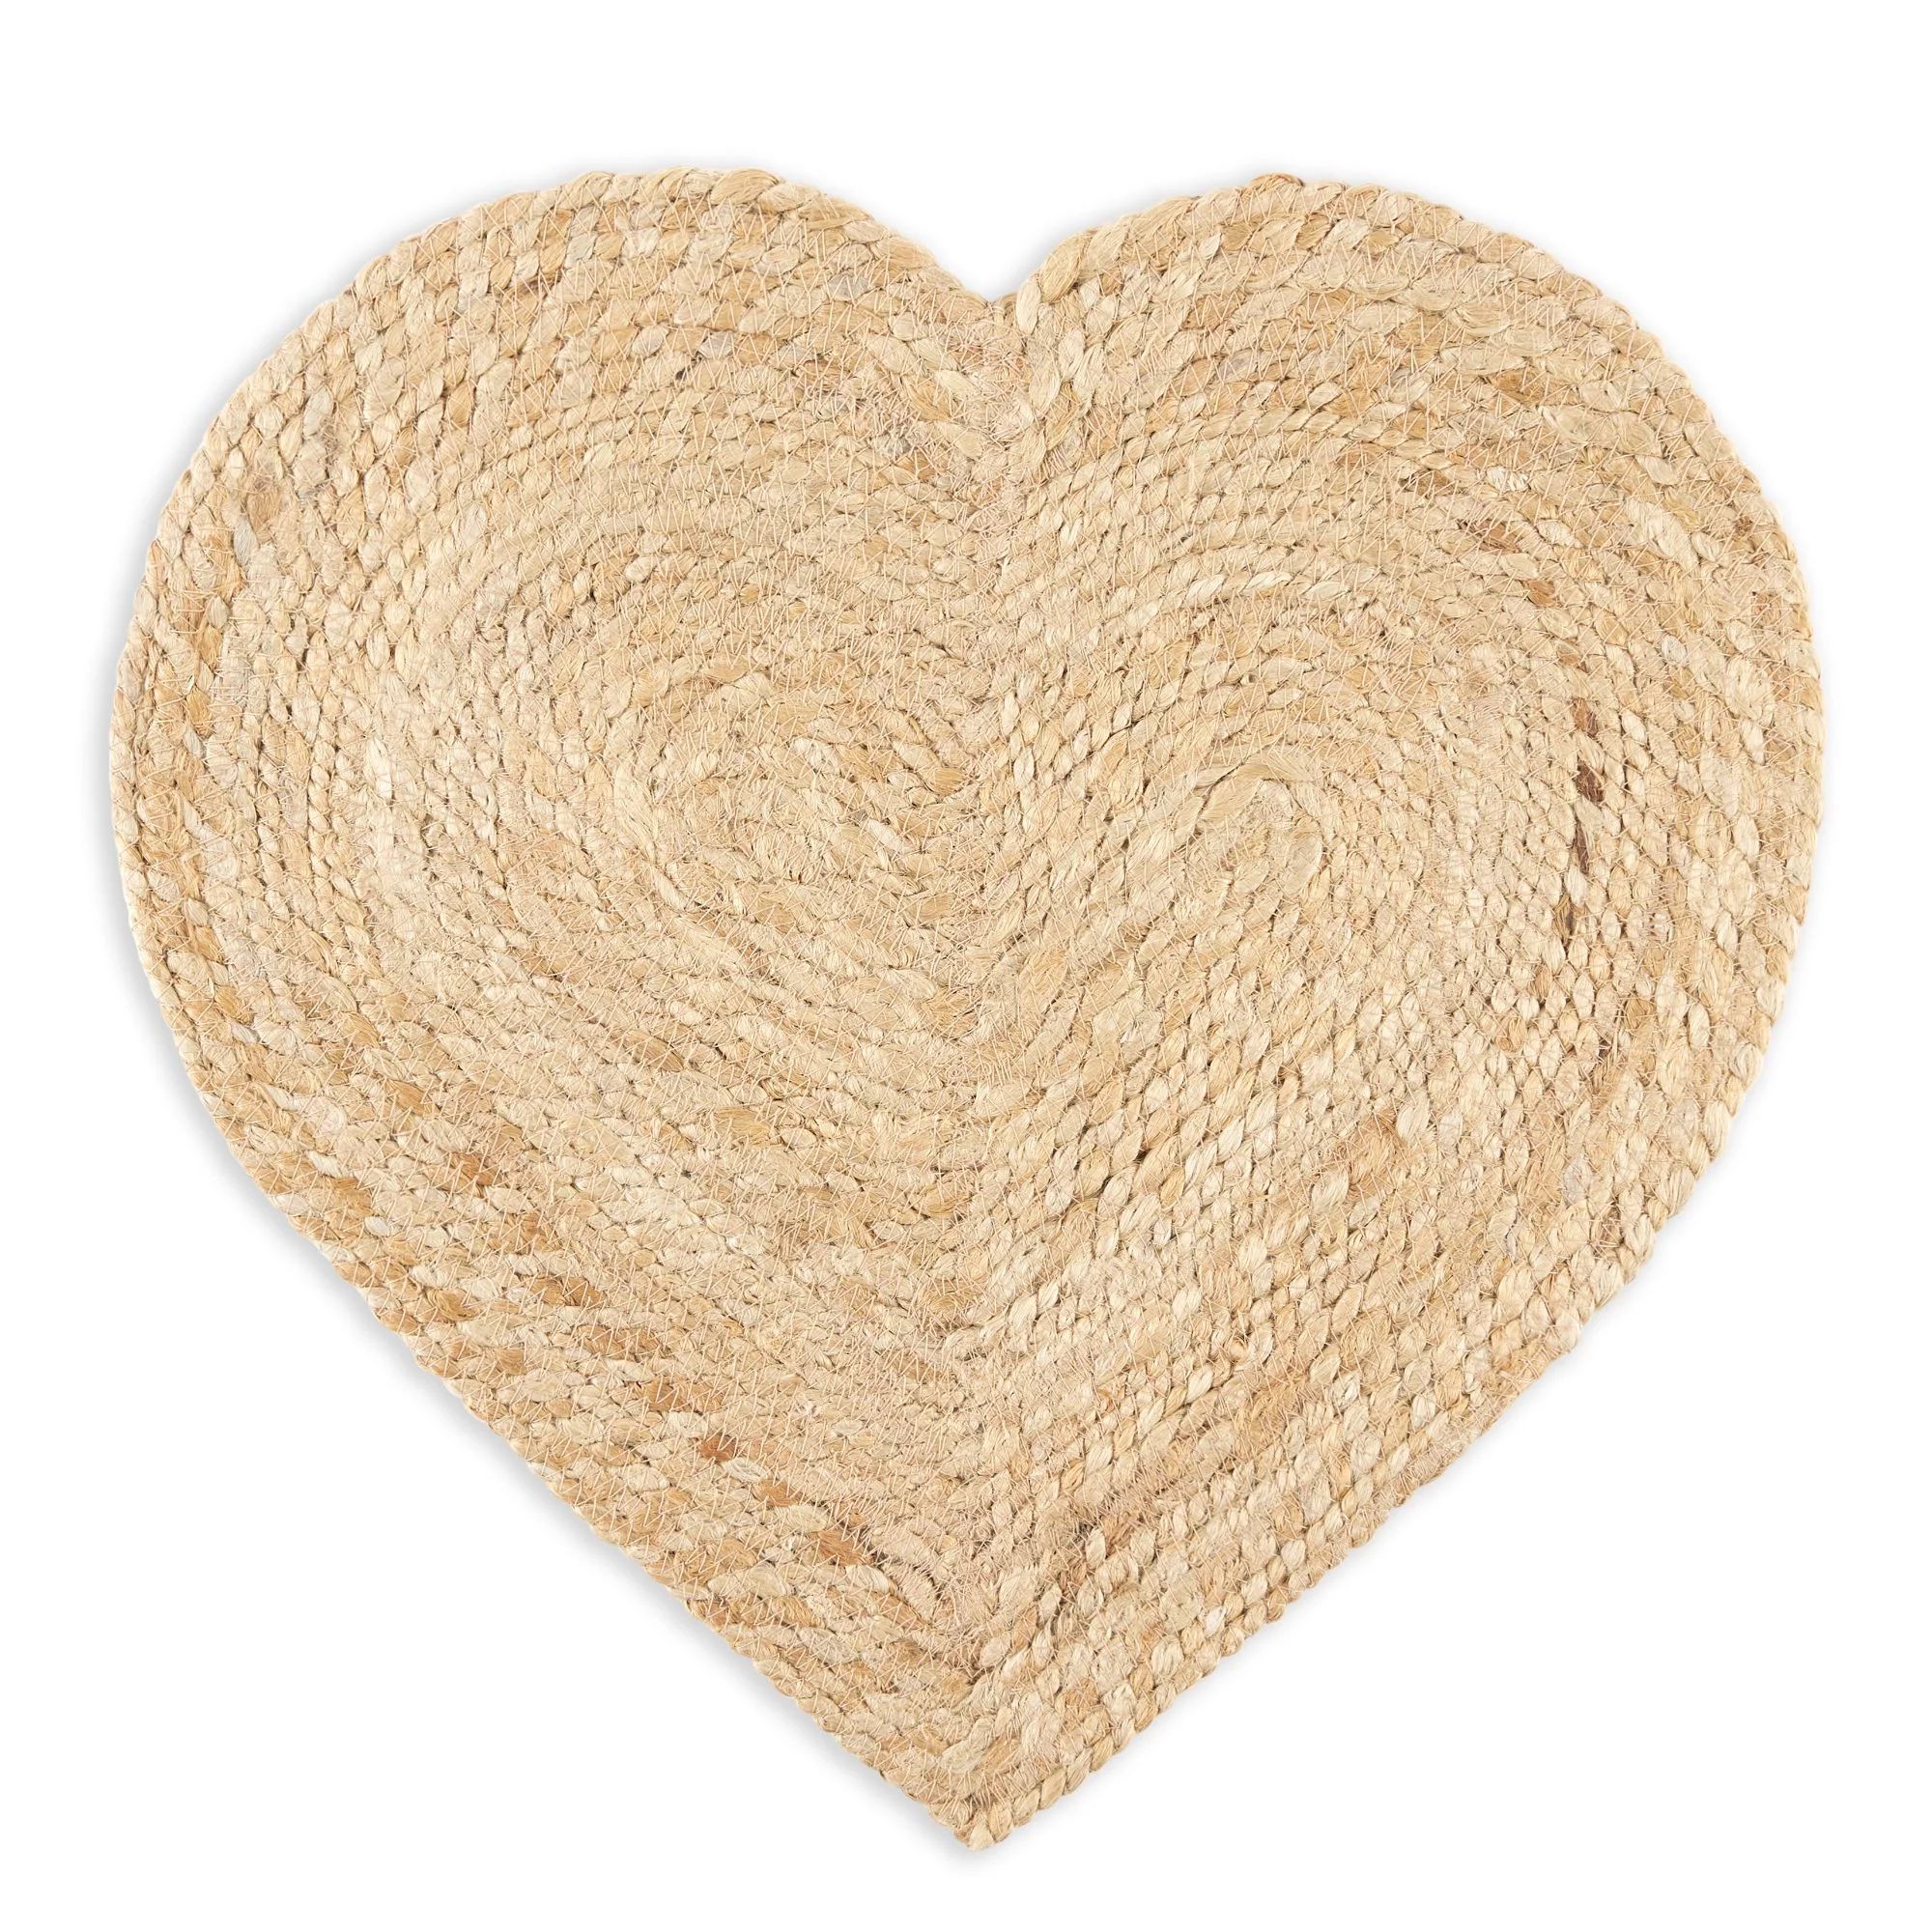 WC WHITE HEART PLACEMAT WITH FRINGE PM-PLACEMAT PM-14X12.75 SIZE WITH FRINGE=16X14.75 150 GSM V1:... | Walmart (US)